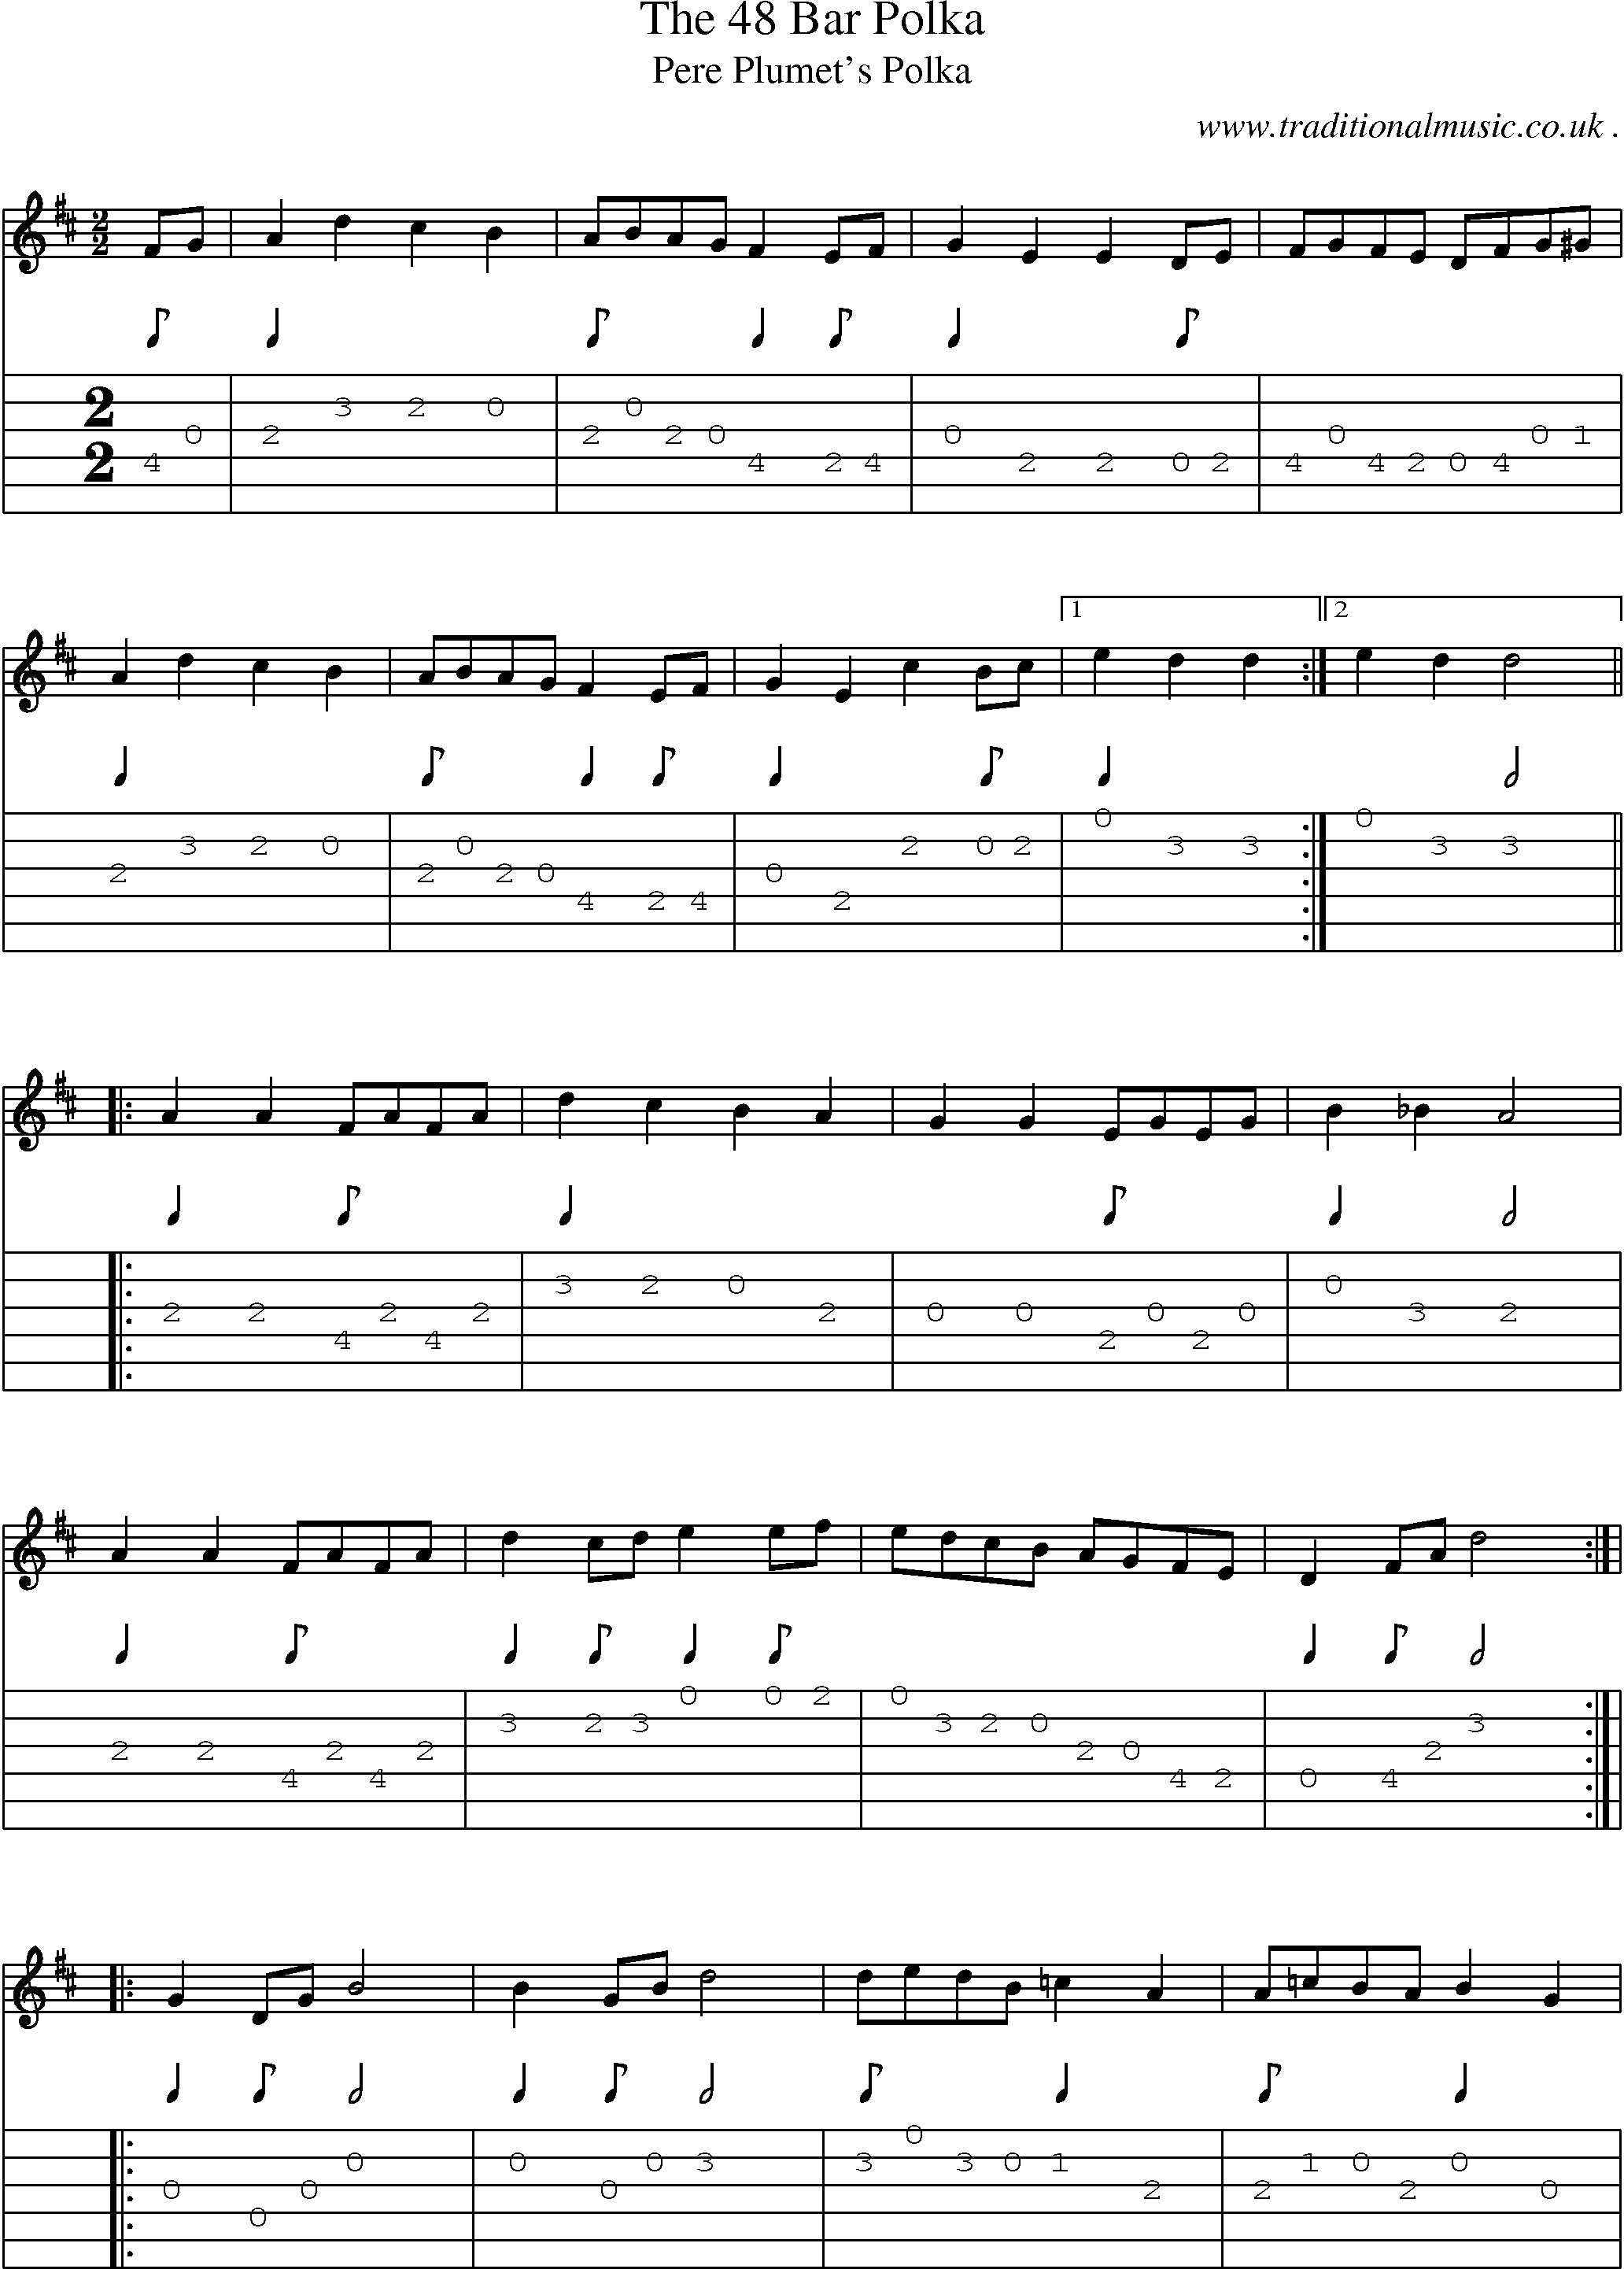 Sheet-Music and Guitar Tabs for The 48 Bar Polka